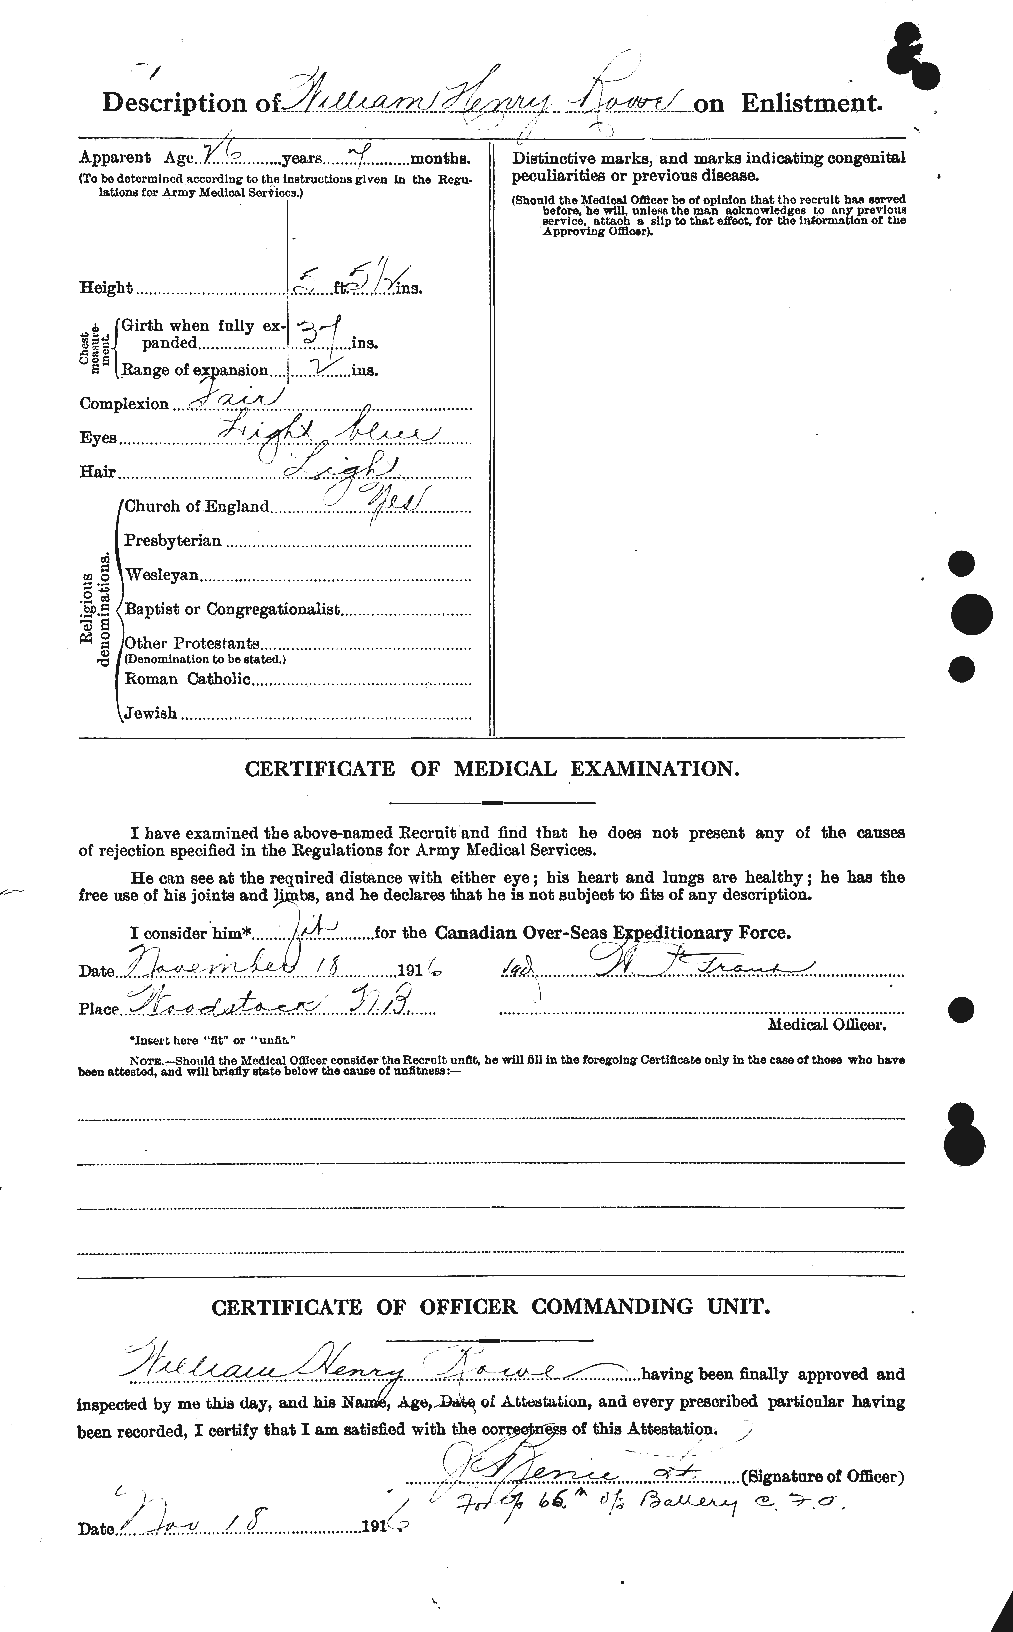 Personnel Records of the First World War - CEF 616028b